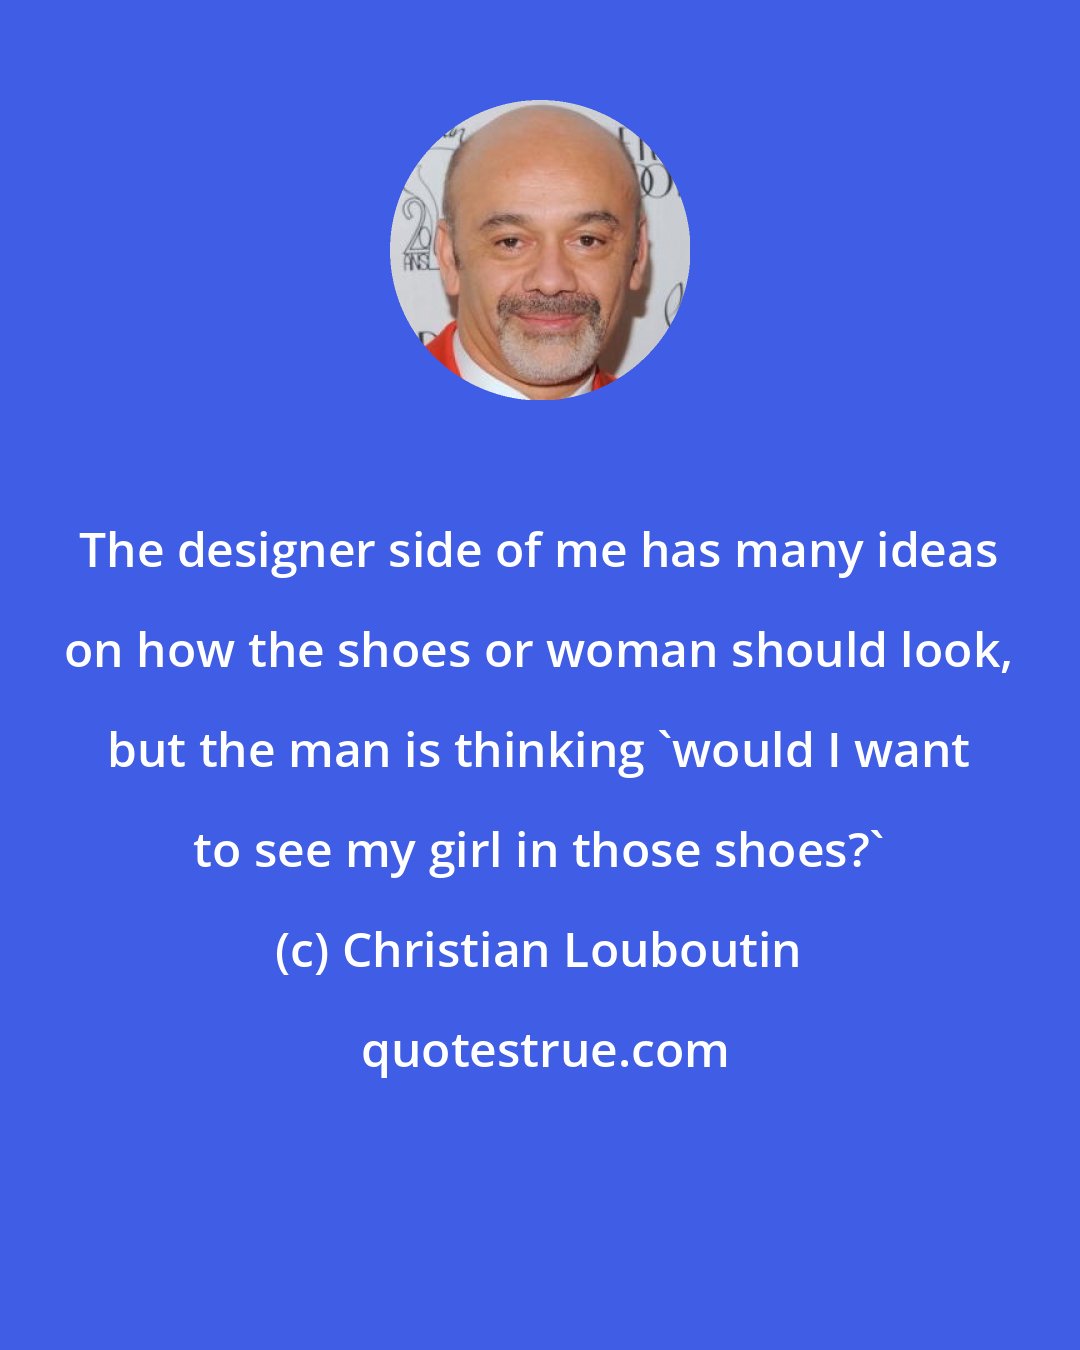 Christian Louboutin: The designer side of me has many ideas on how the shoes or woman should look, but the man is thinking 'would I want to see my girl in those shoes?'